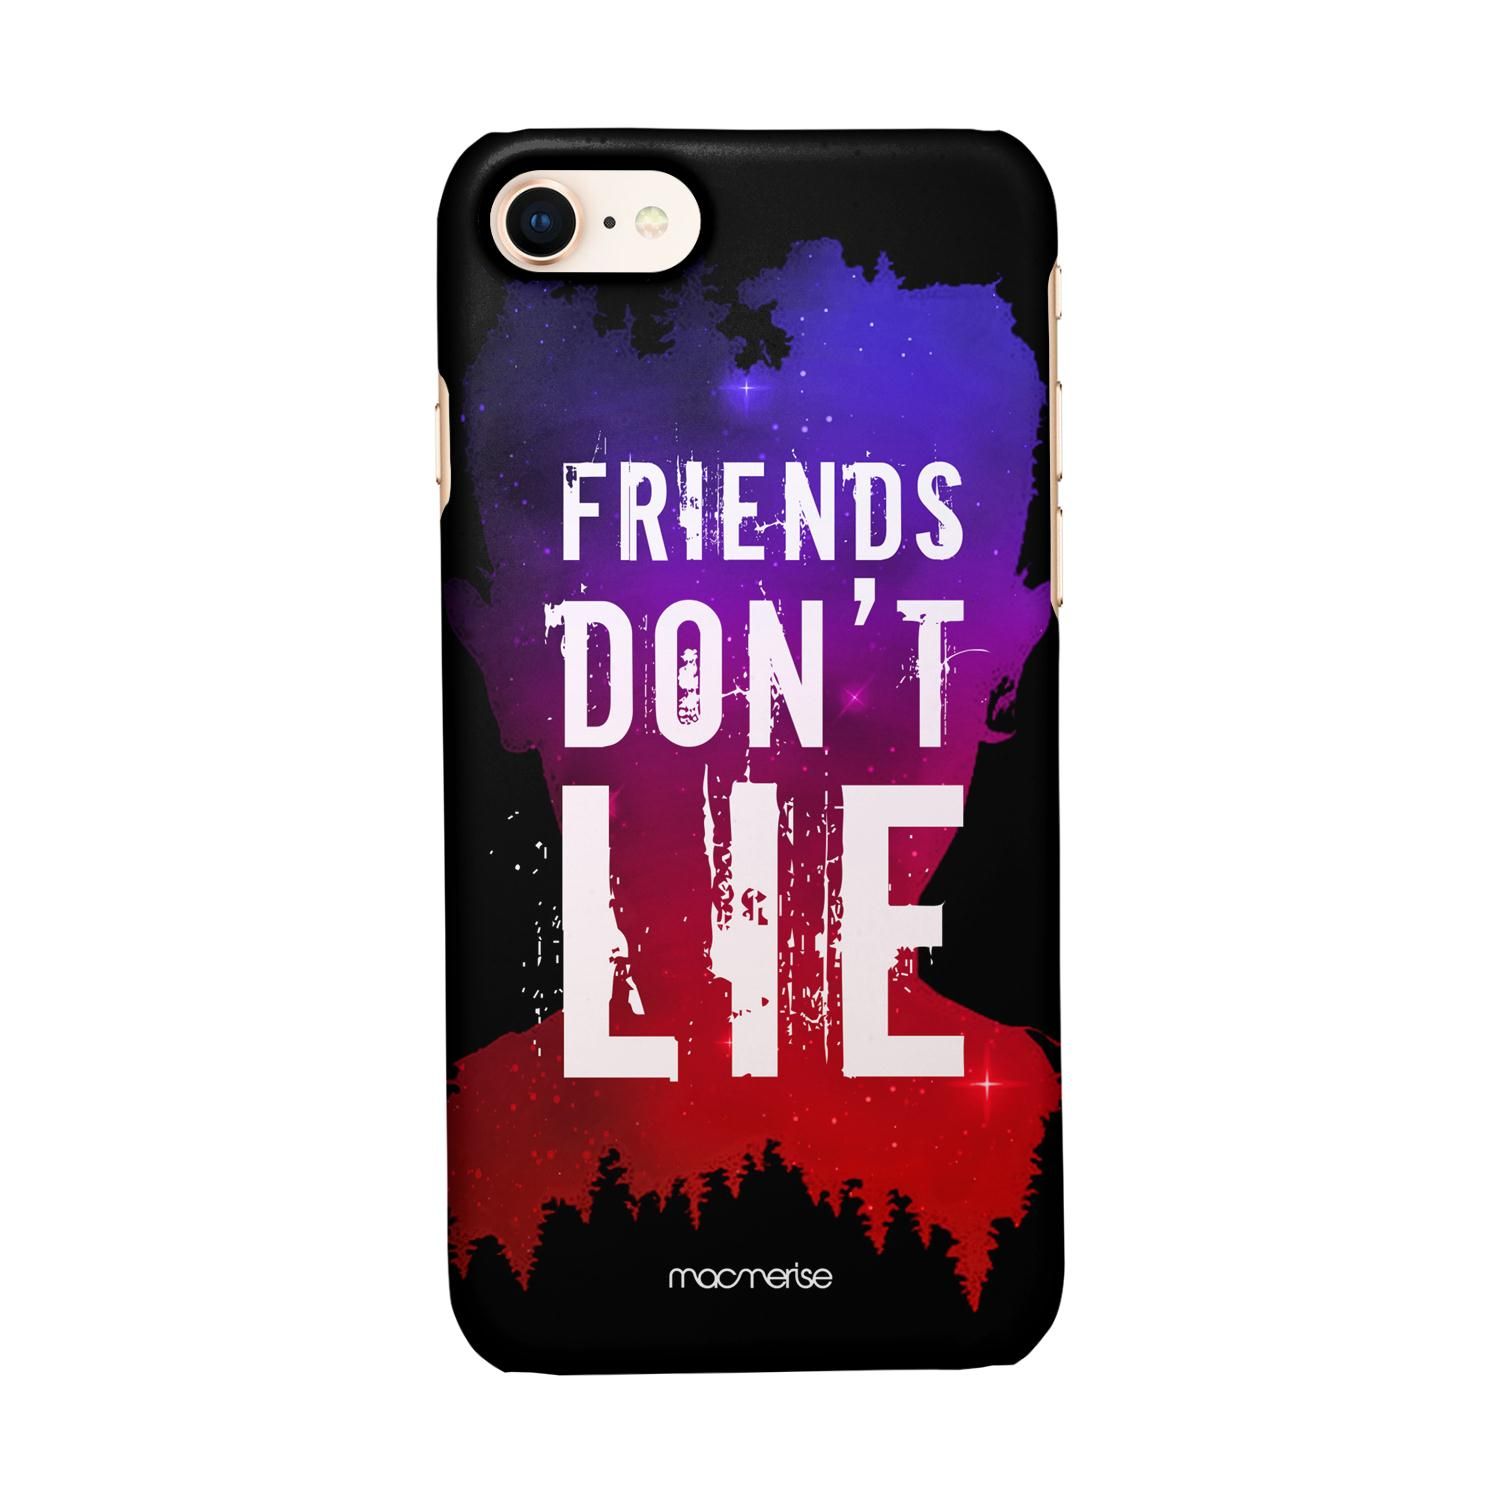 Buy Friends Dont Lie - Sleek Phone Case for iPhone 7 Online